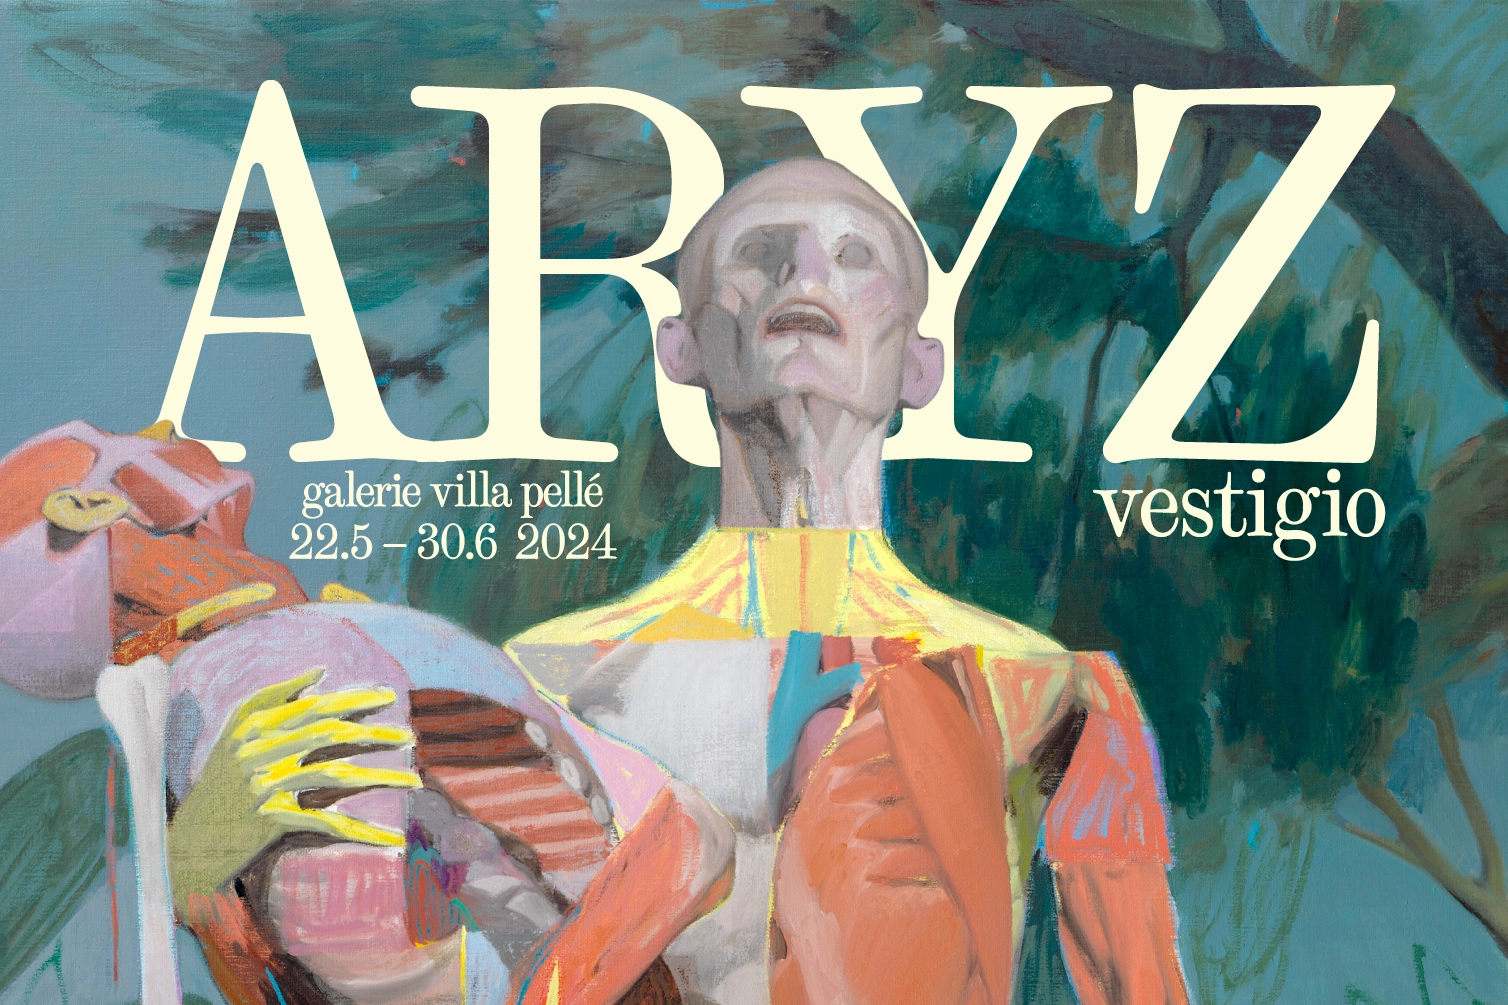 The works of Aryz, an icon of street art and a Spanish painter, will fill the Prague Villa Pellé Gallery.